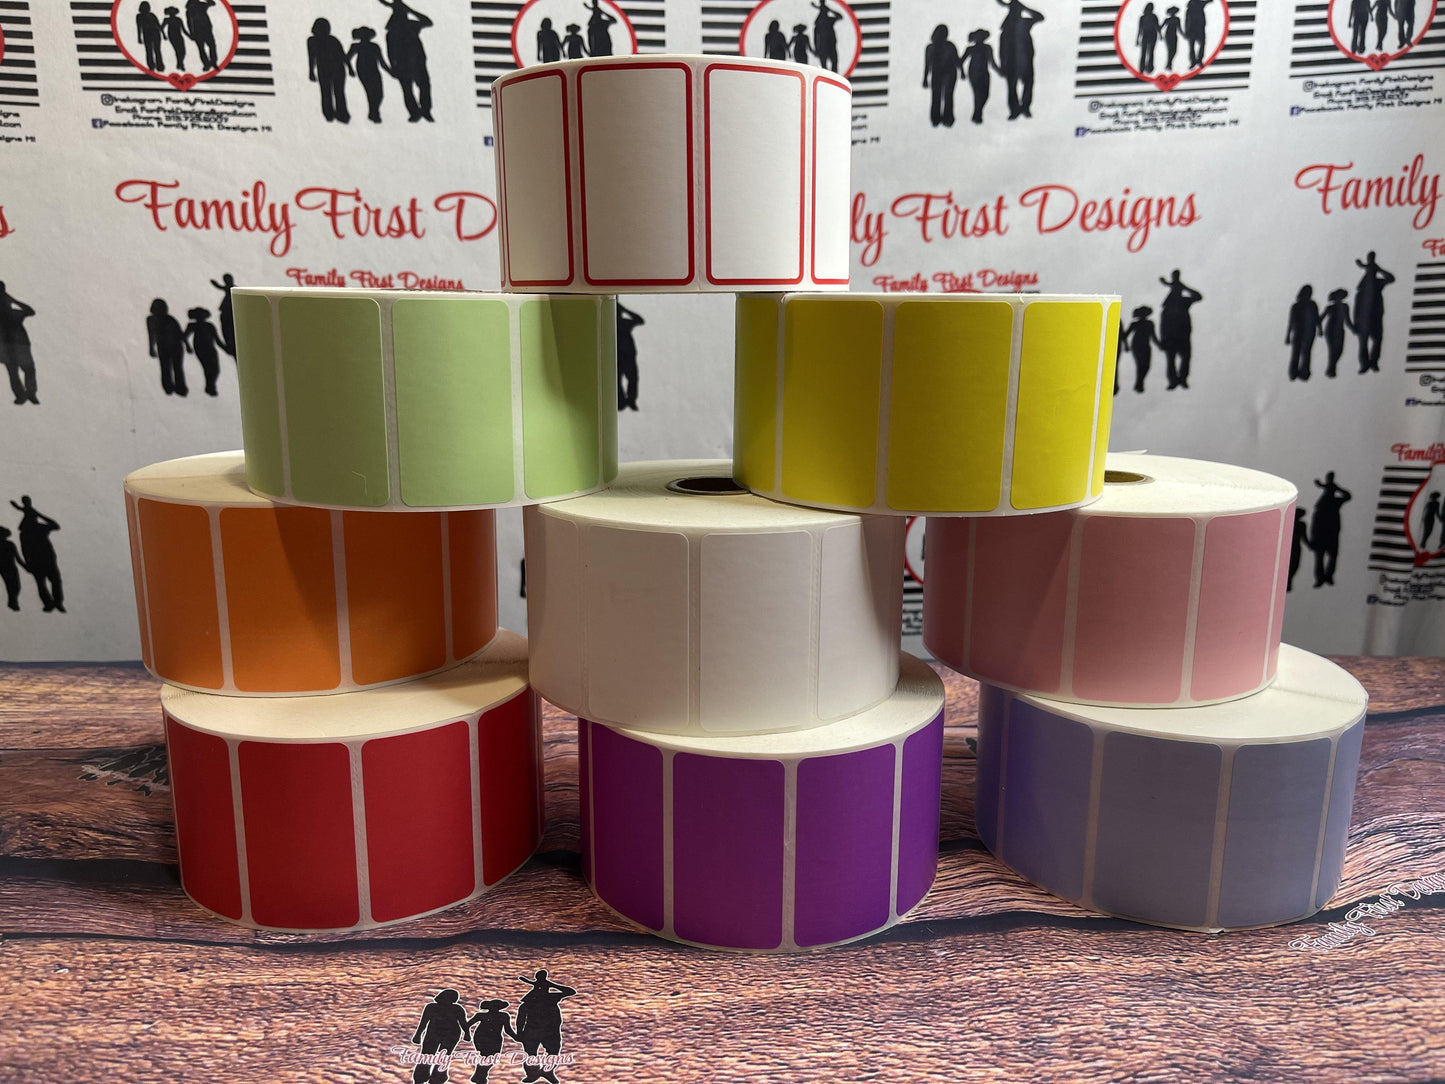 Custom business labels, personalized packaging labels, fragile stickers, thank you stickers, minimal packaging labels, social media labels - Family First Designs LLC